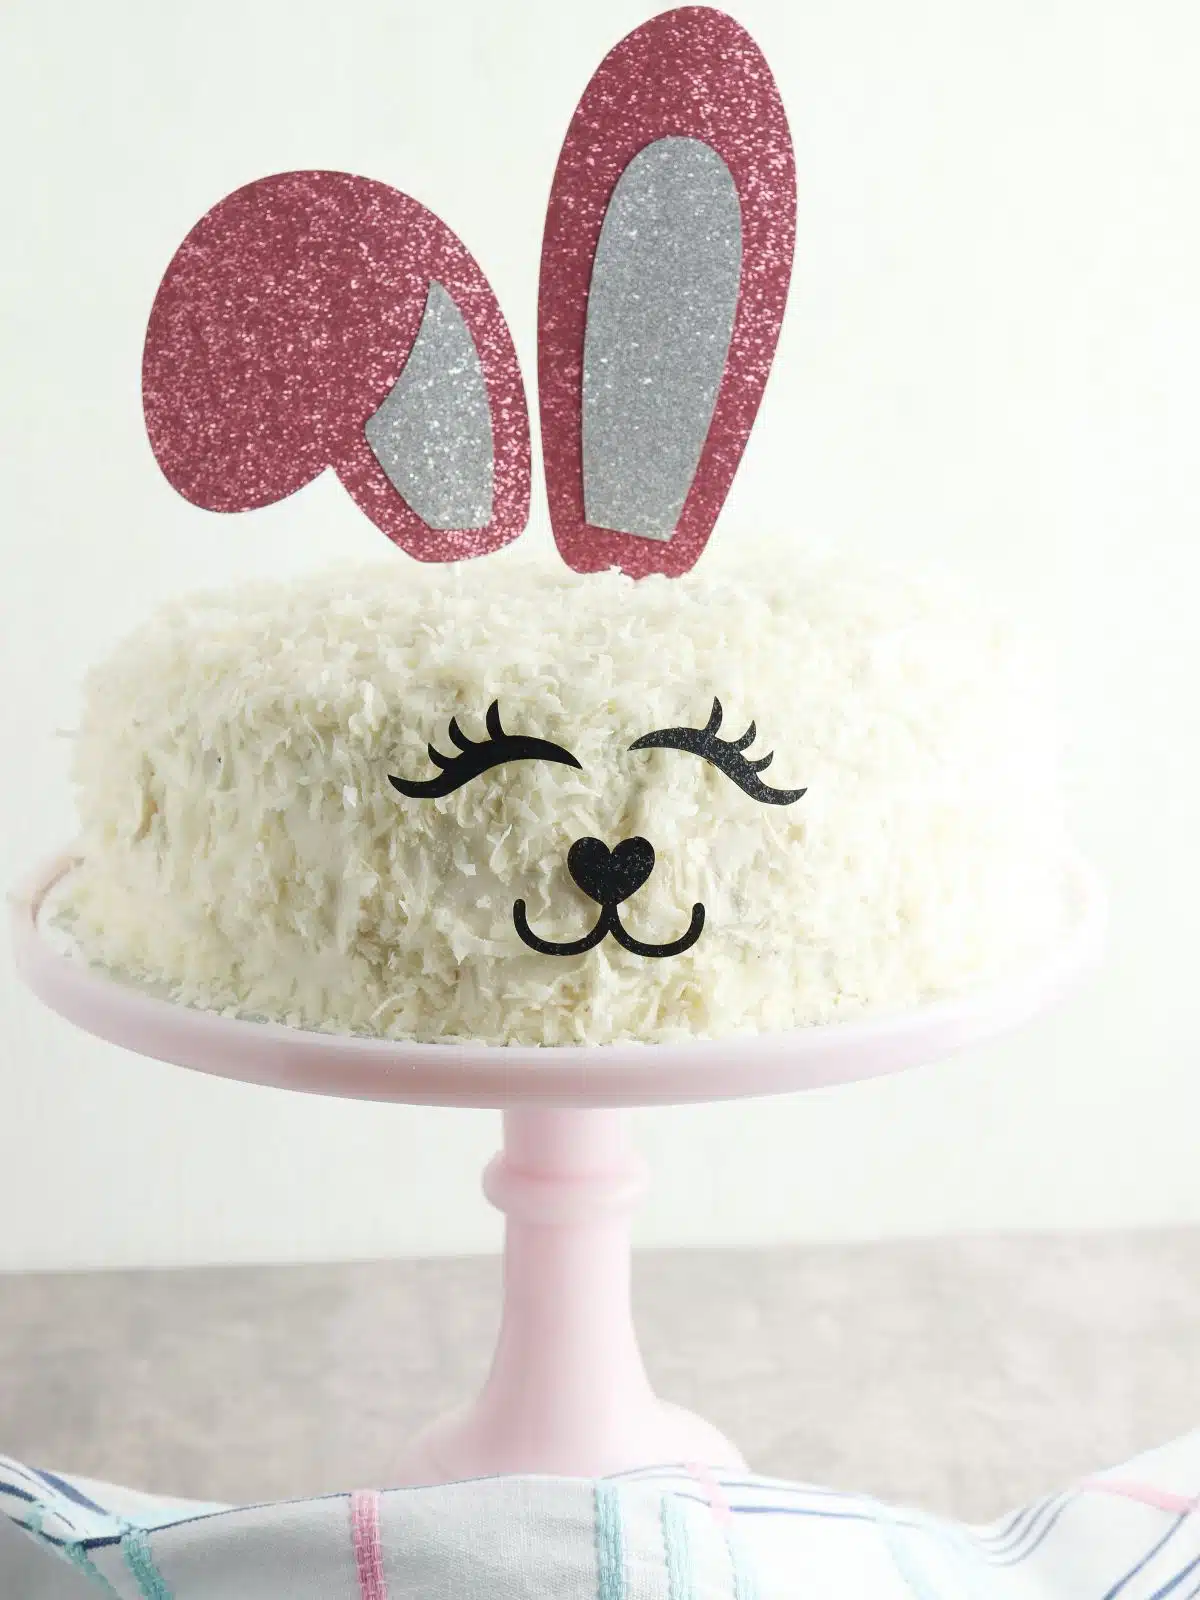 round cake with bunny ears, eyes and nose on pink cake stand.